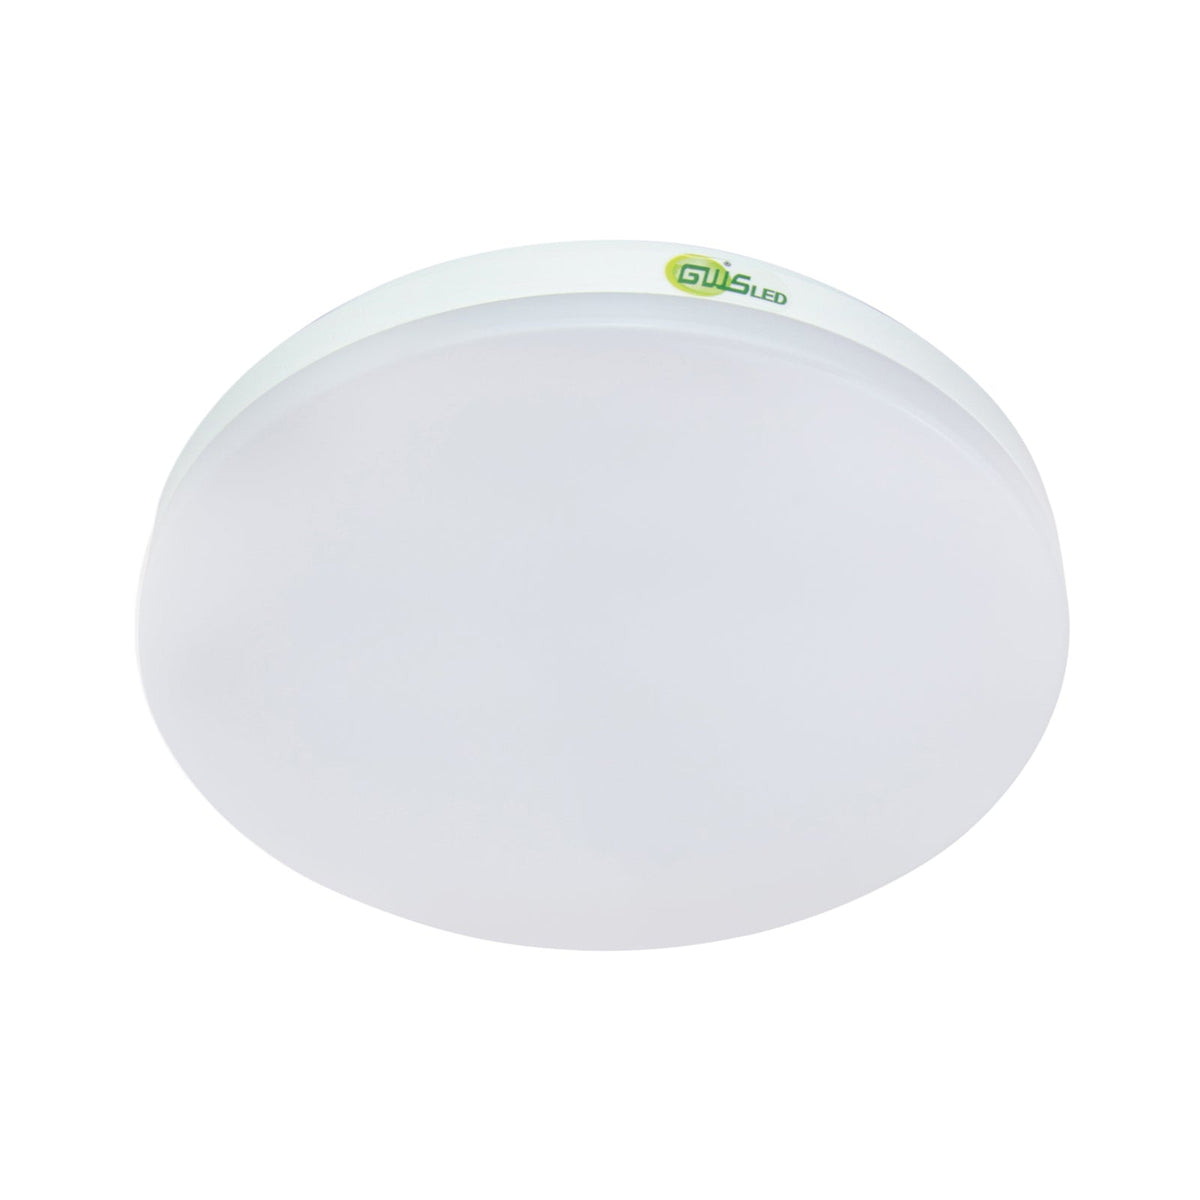 G.W.S LED Wholesale LED Ceiling Lights 18W / Tricolour (3000K+4000K+6000K) / Emergency IP44 18W Slim LED Ceiling Light With 3 Colours Built-in & Emergency Function